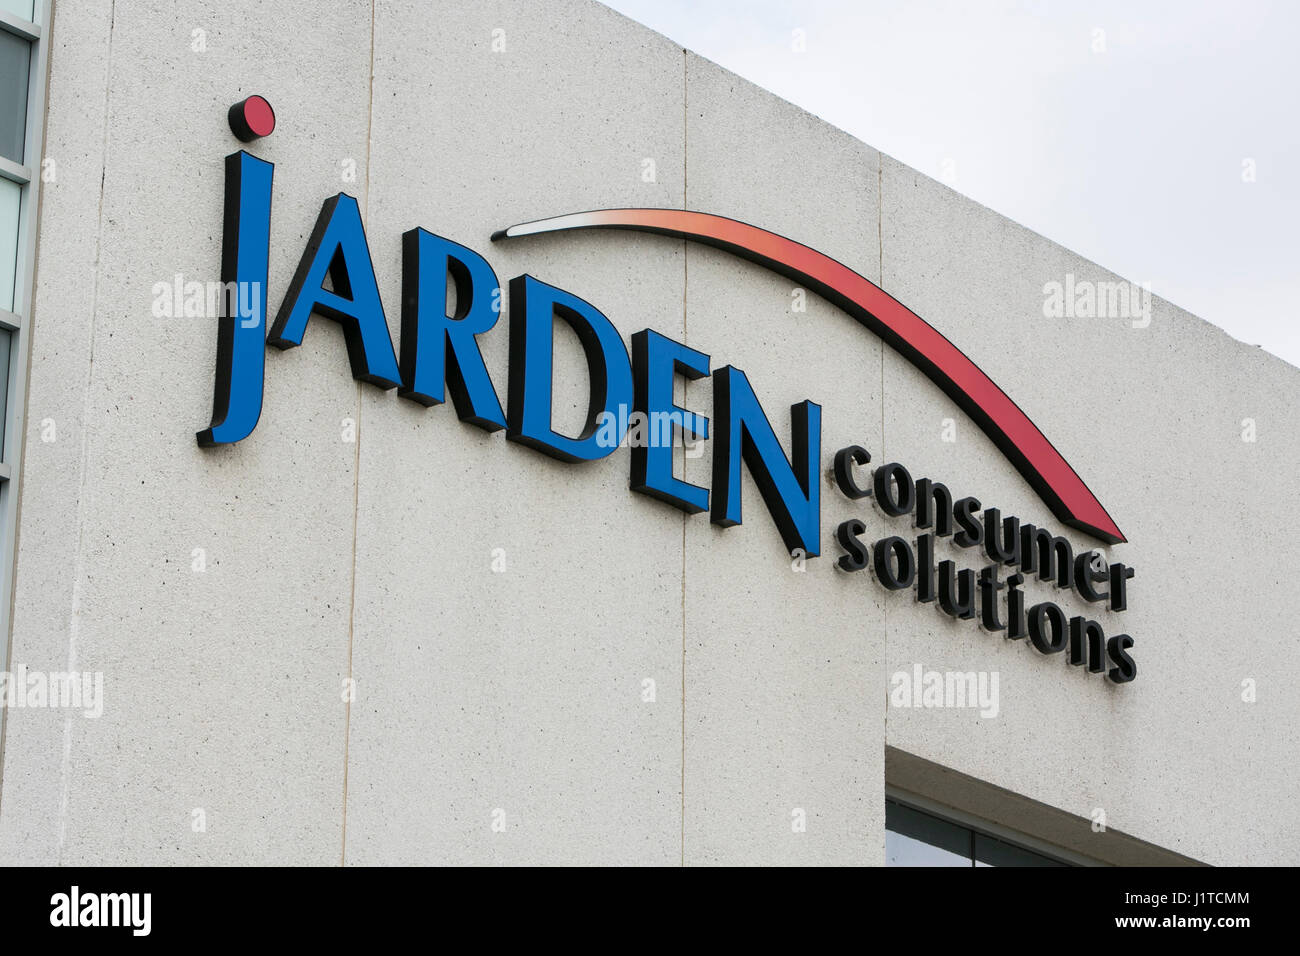 A logo sign outside of facility occupied by Jarden Consumer Solutions in Brampton, Ontario, Canada, on April 16, 2017. Stock Photo